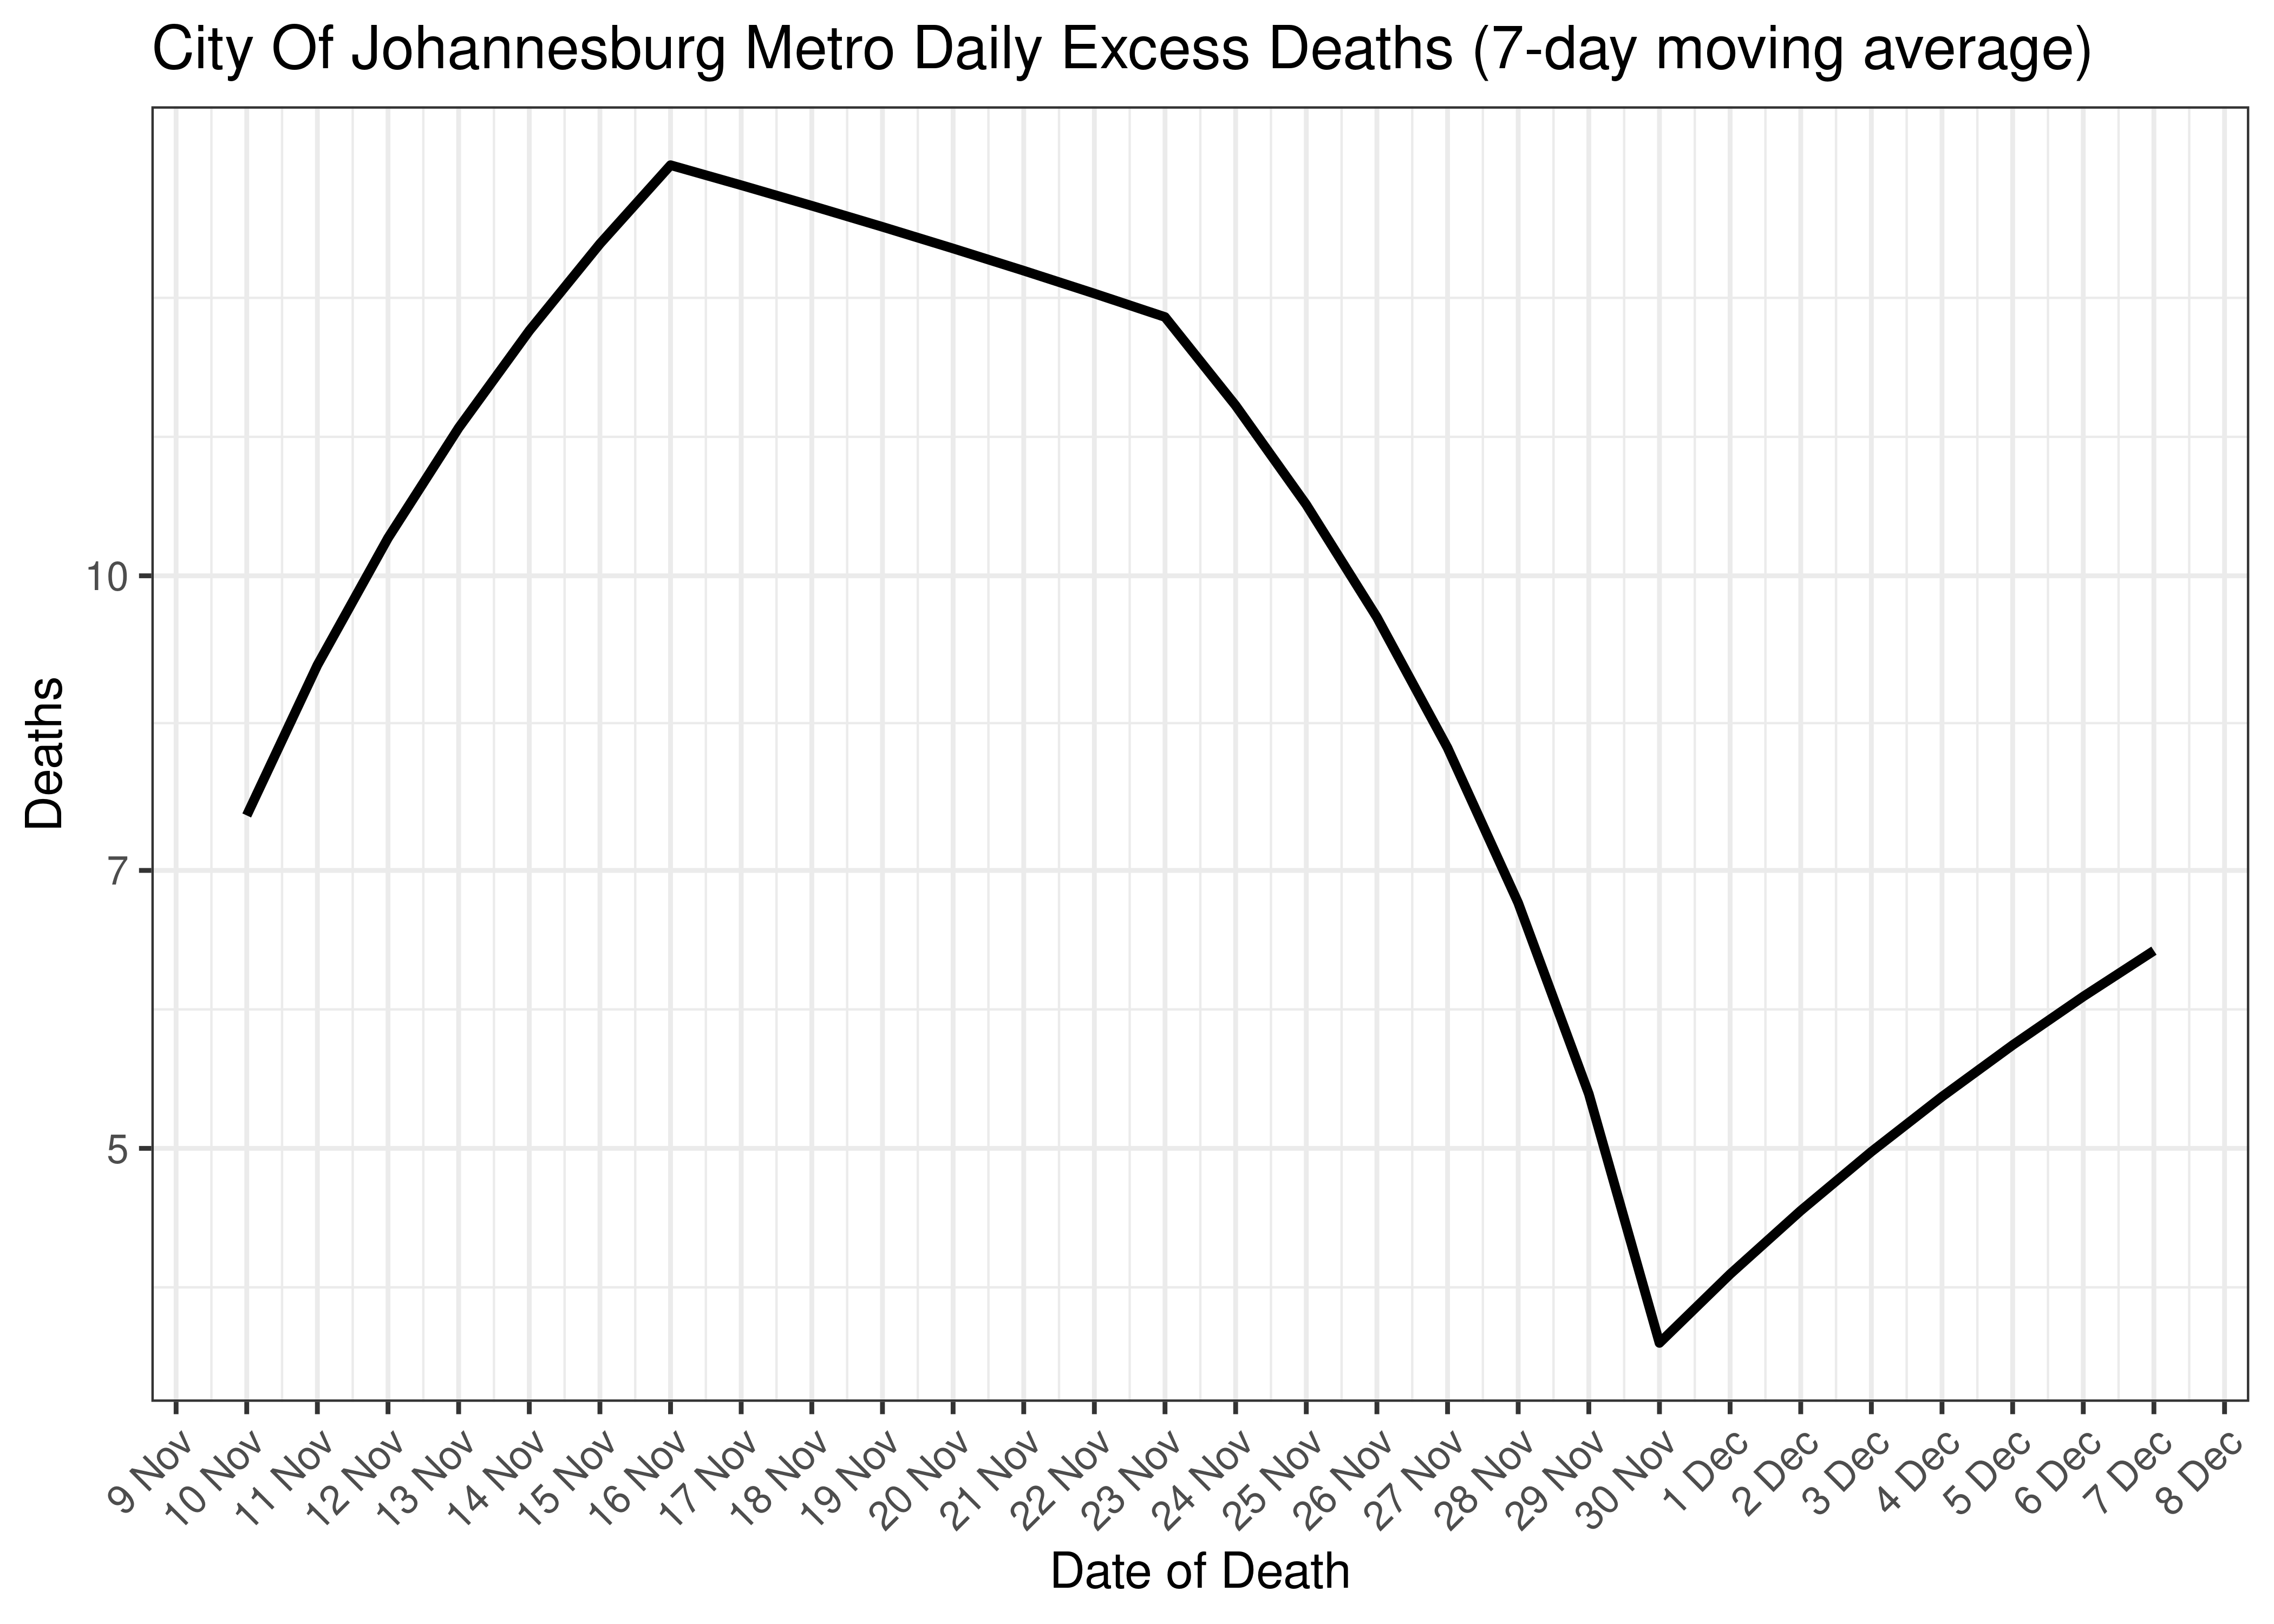 City Of Johannesburg Metro Excess Deaths for Last 30-days (7-day moving average)